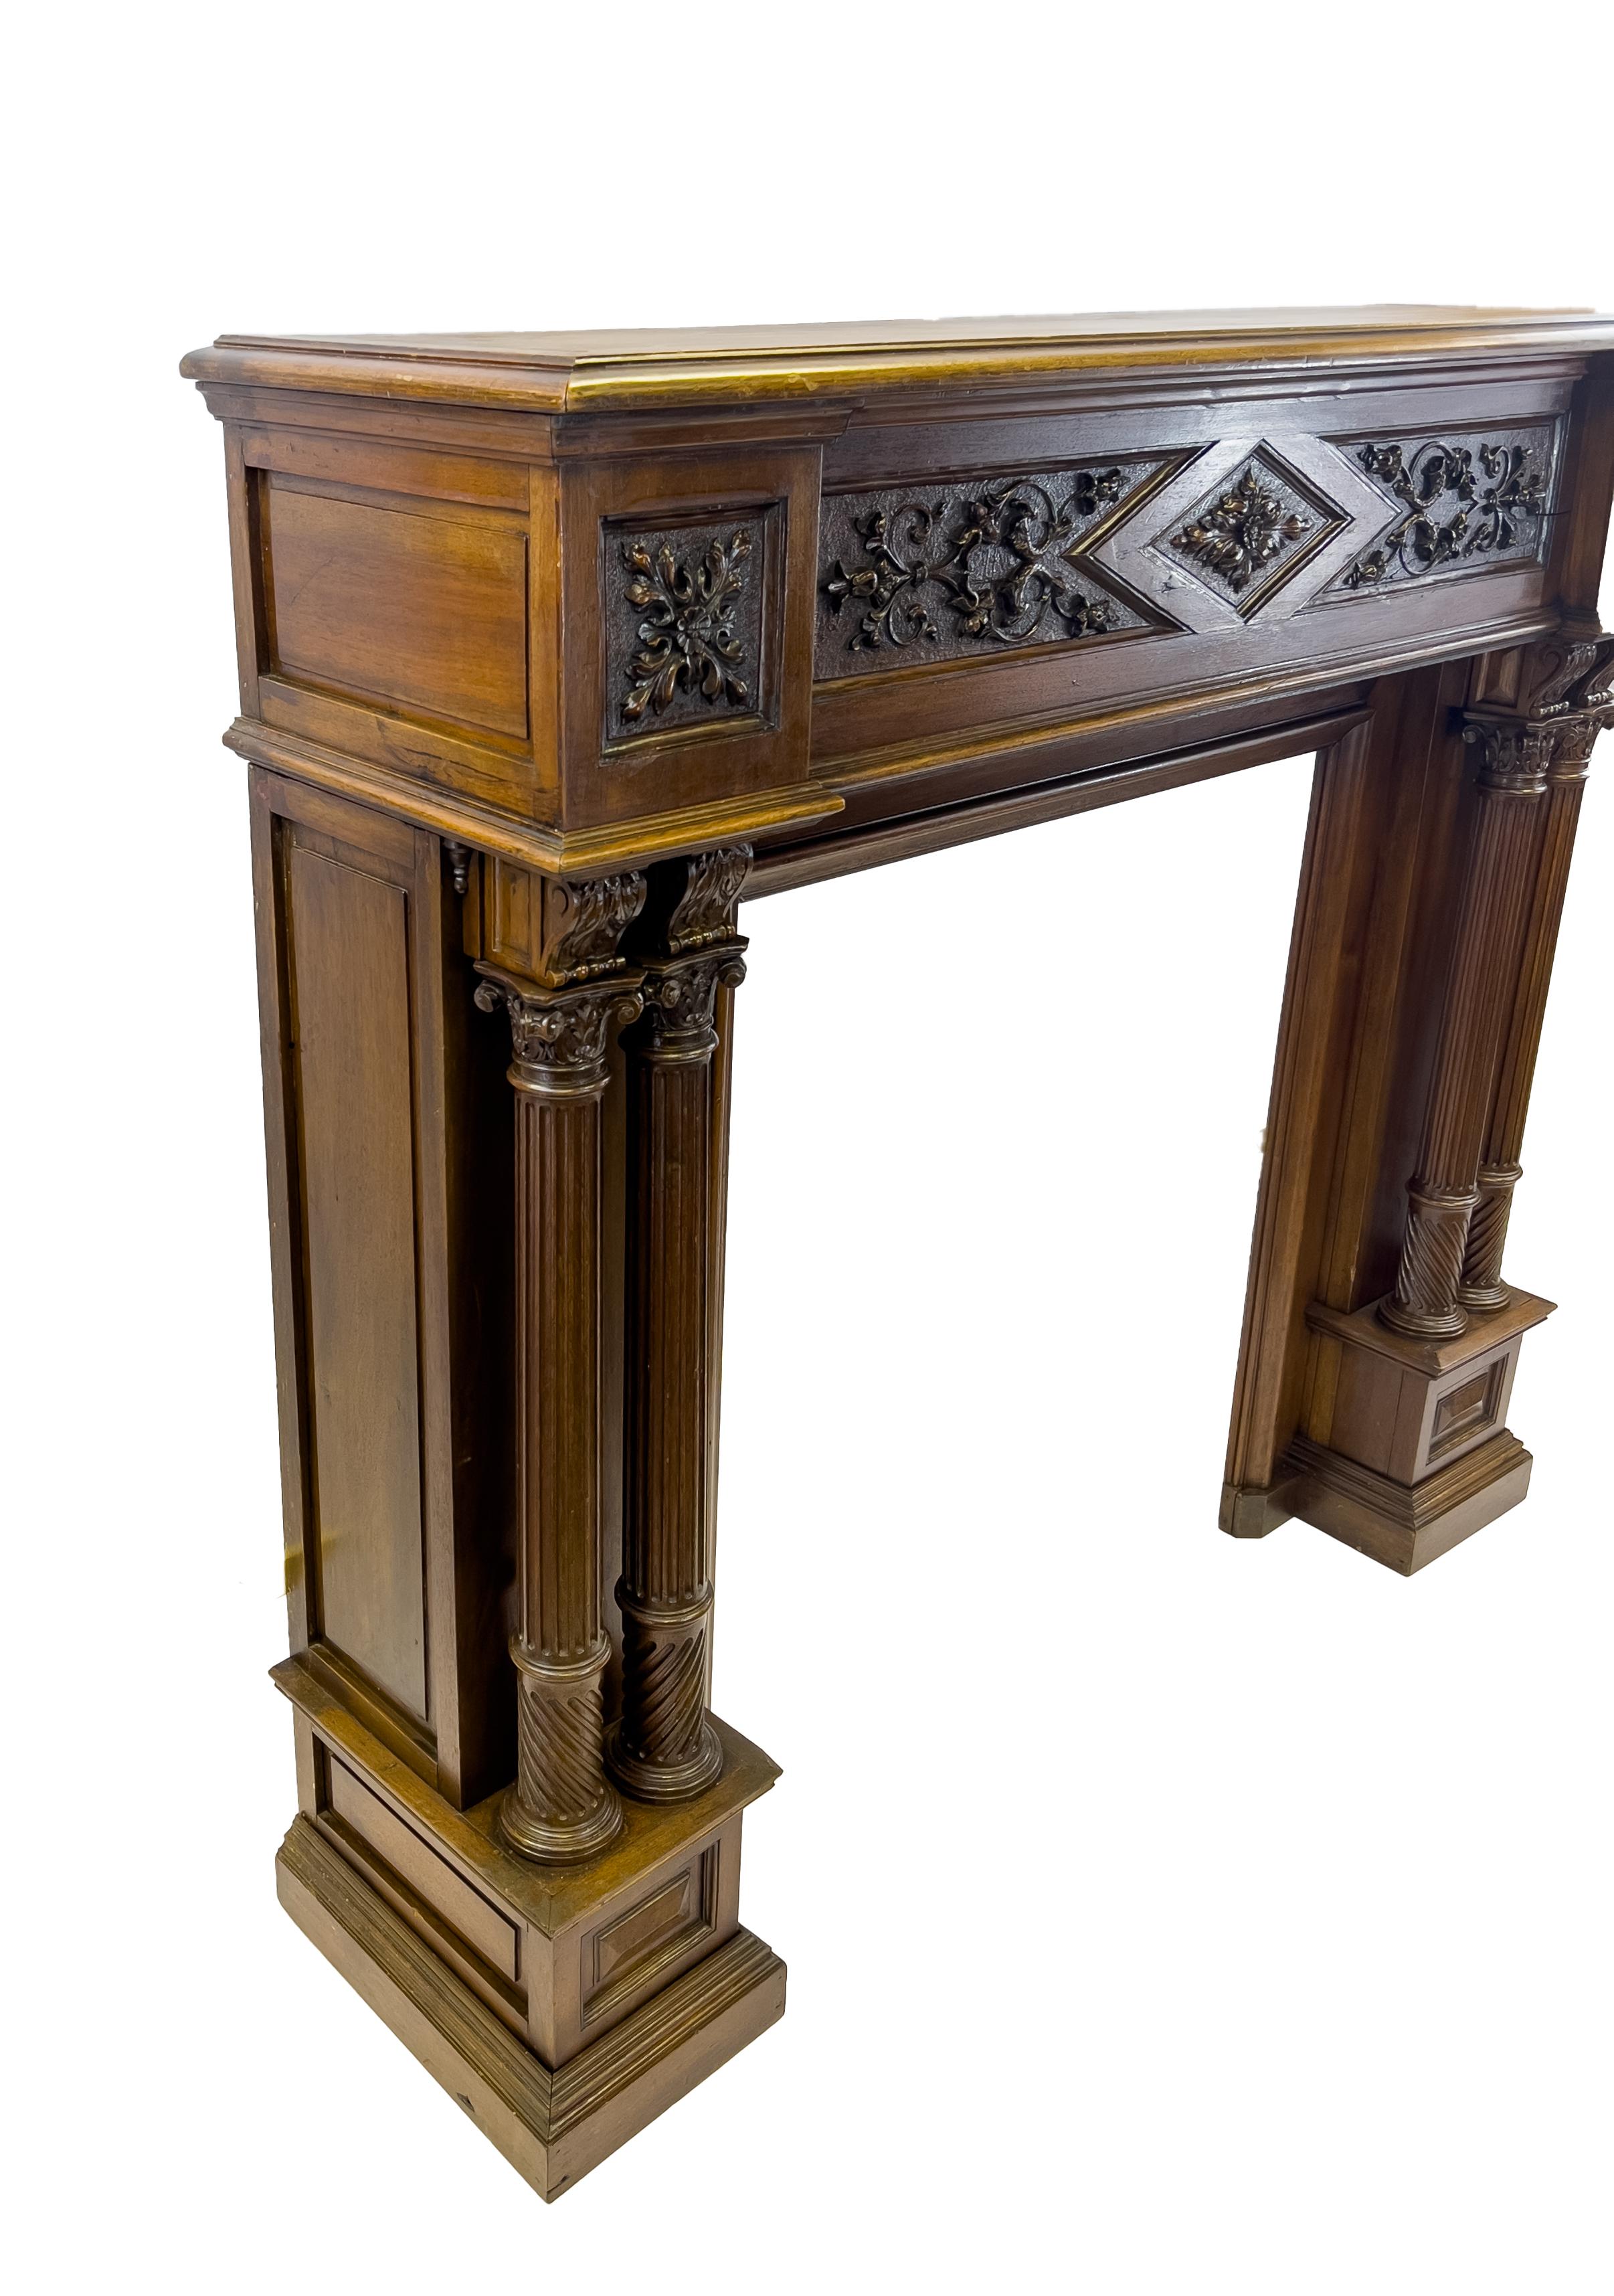 A fine fireplace mantel with beautiful details across the frame and dual round columns on both sides. 
  